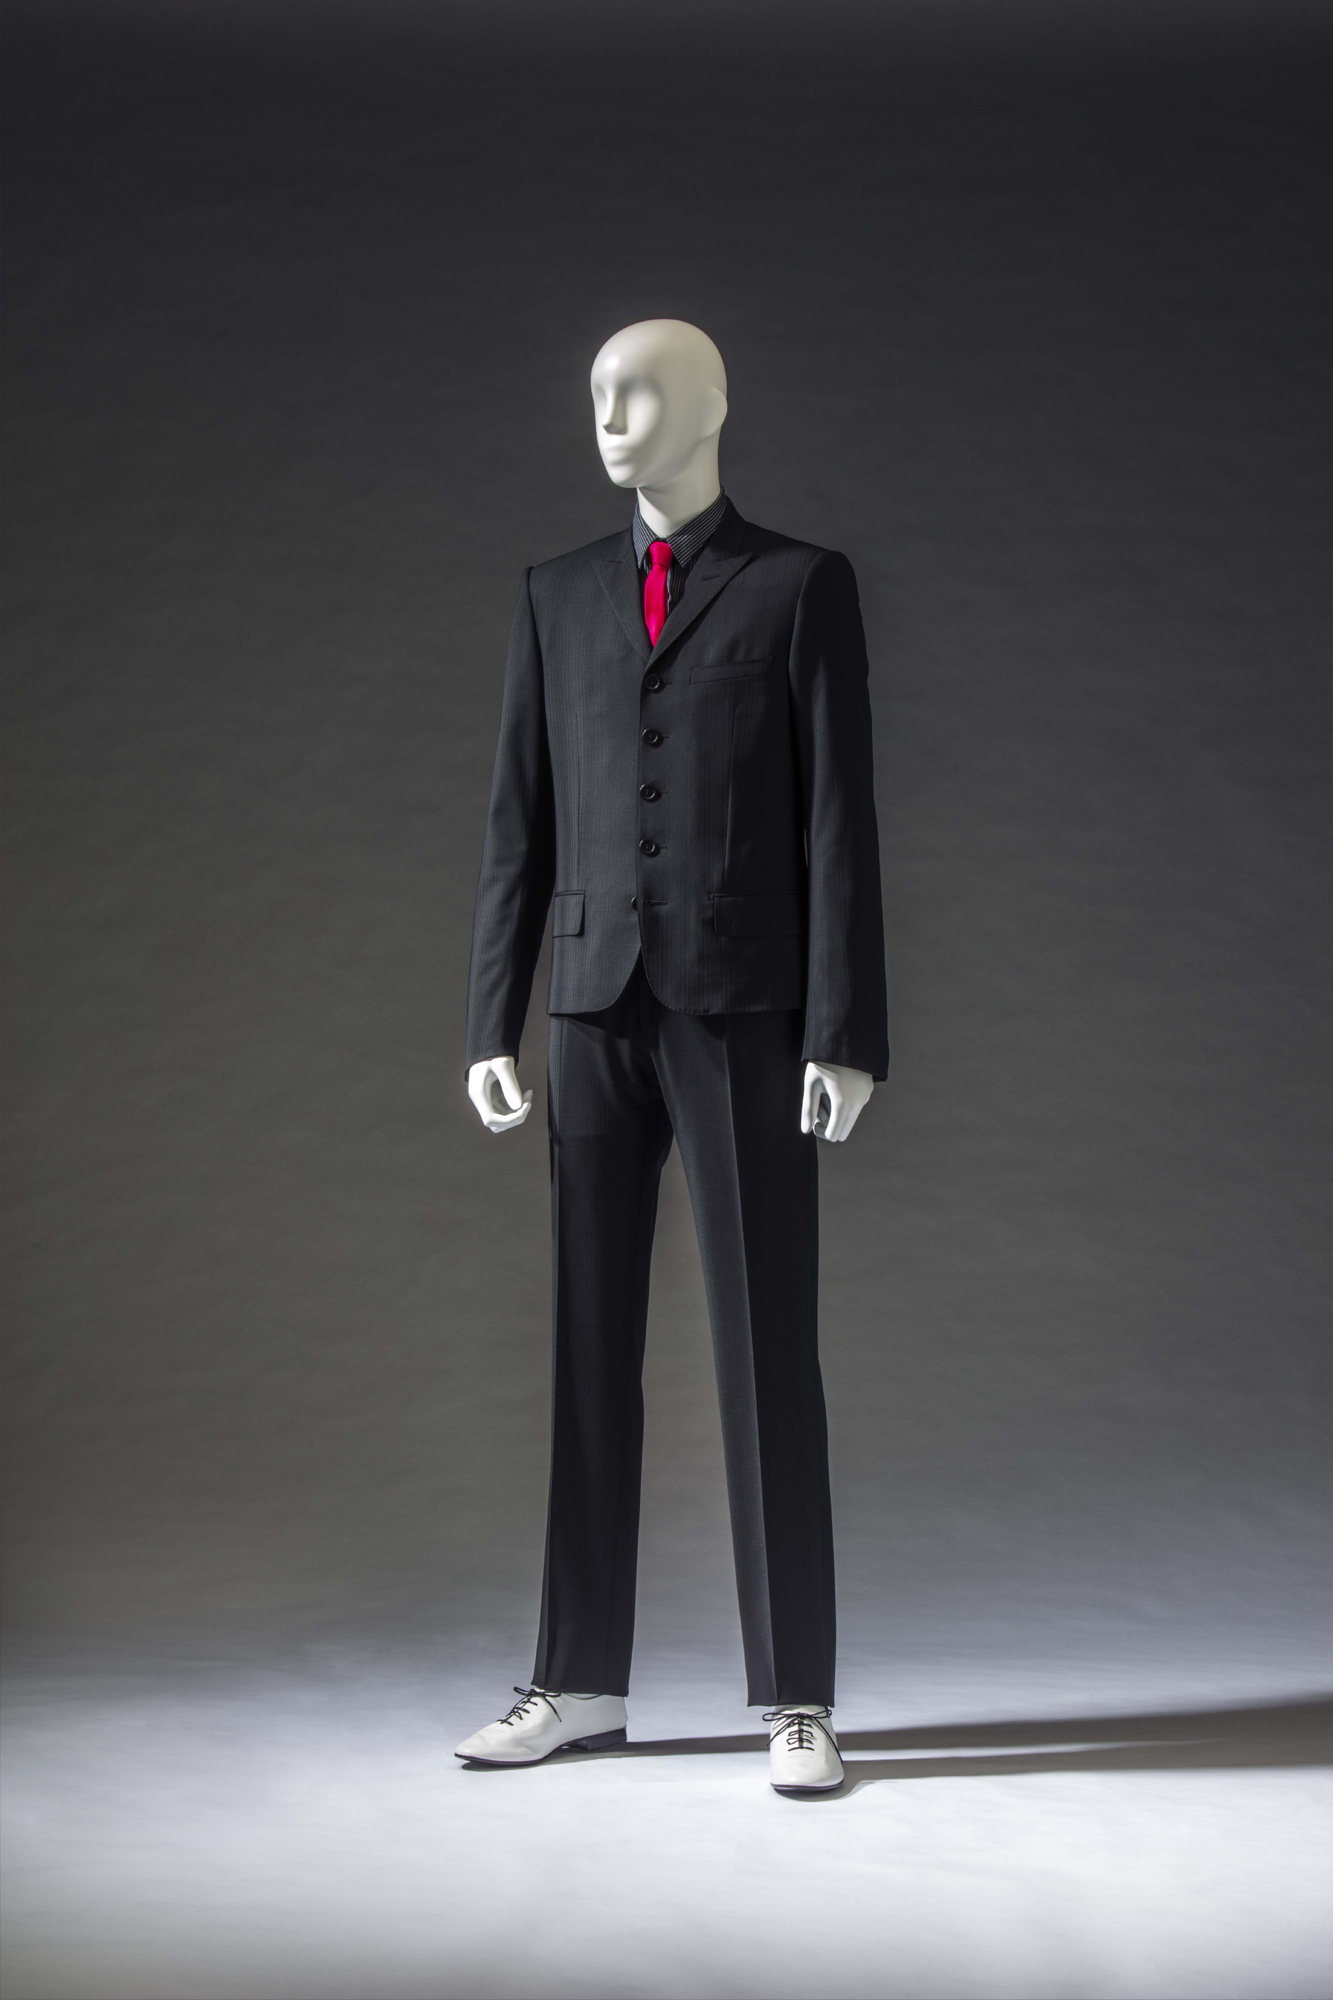 Suit (jacket and trousers)